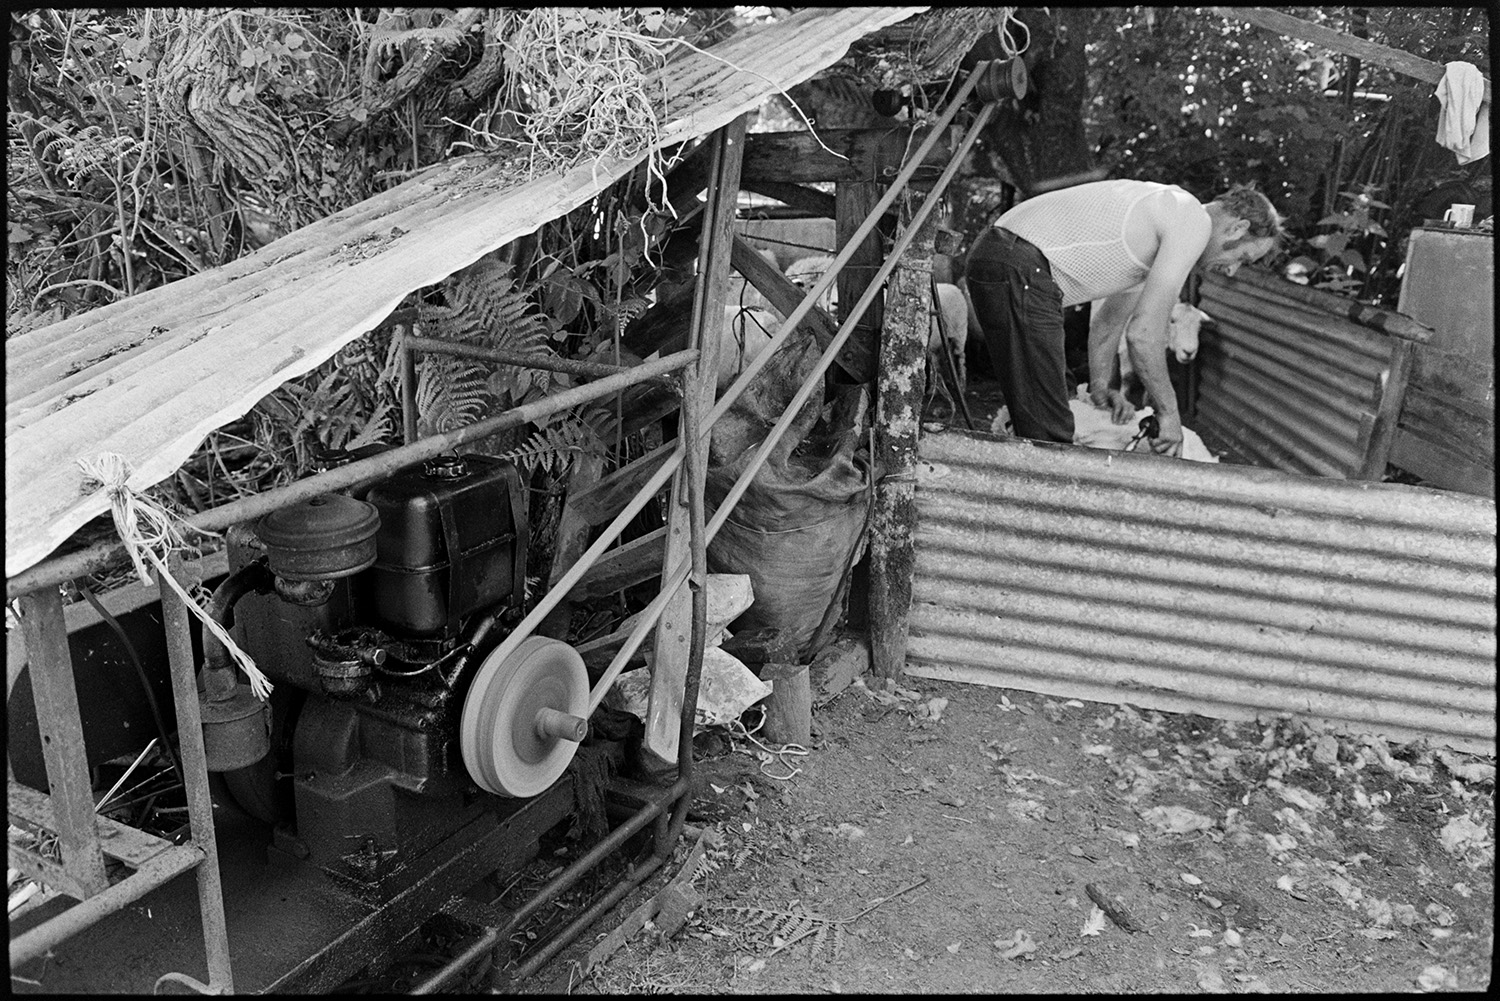 Farmer shearing sheep under tree. Woman farmer bundling up fleeces.
[A man, wearing a string vest, shearing sheep in a corrugated iron pen at Cuppers Piece, Beaford. The pulley and machine which is powering the shearing machine can be seen in the foreground.]